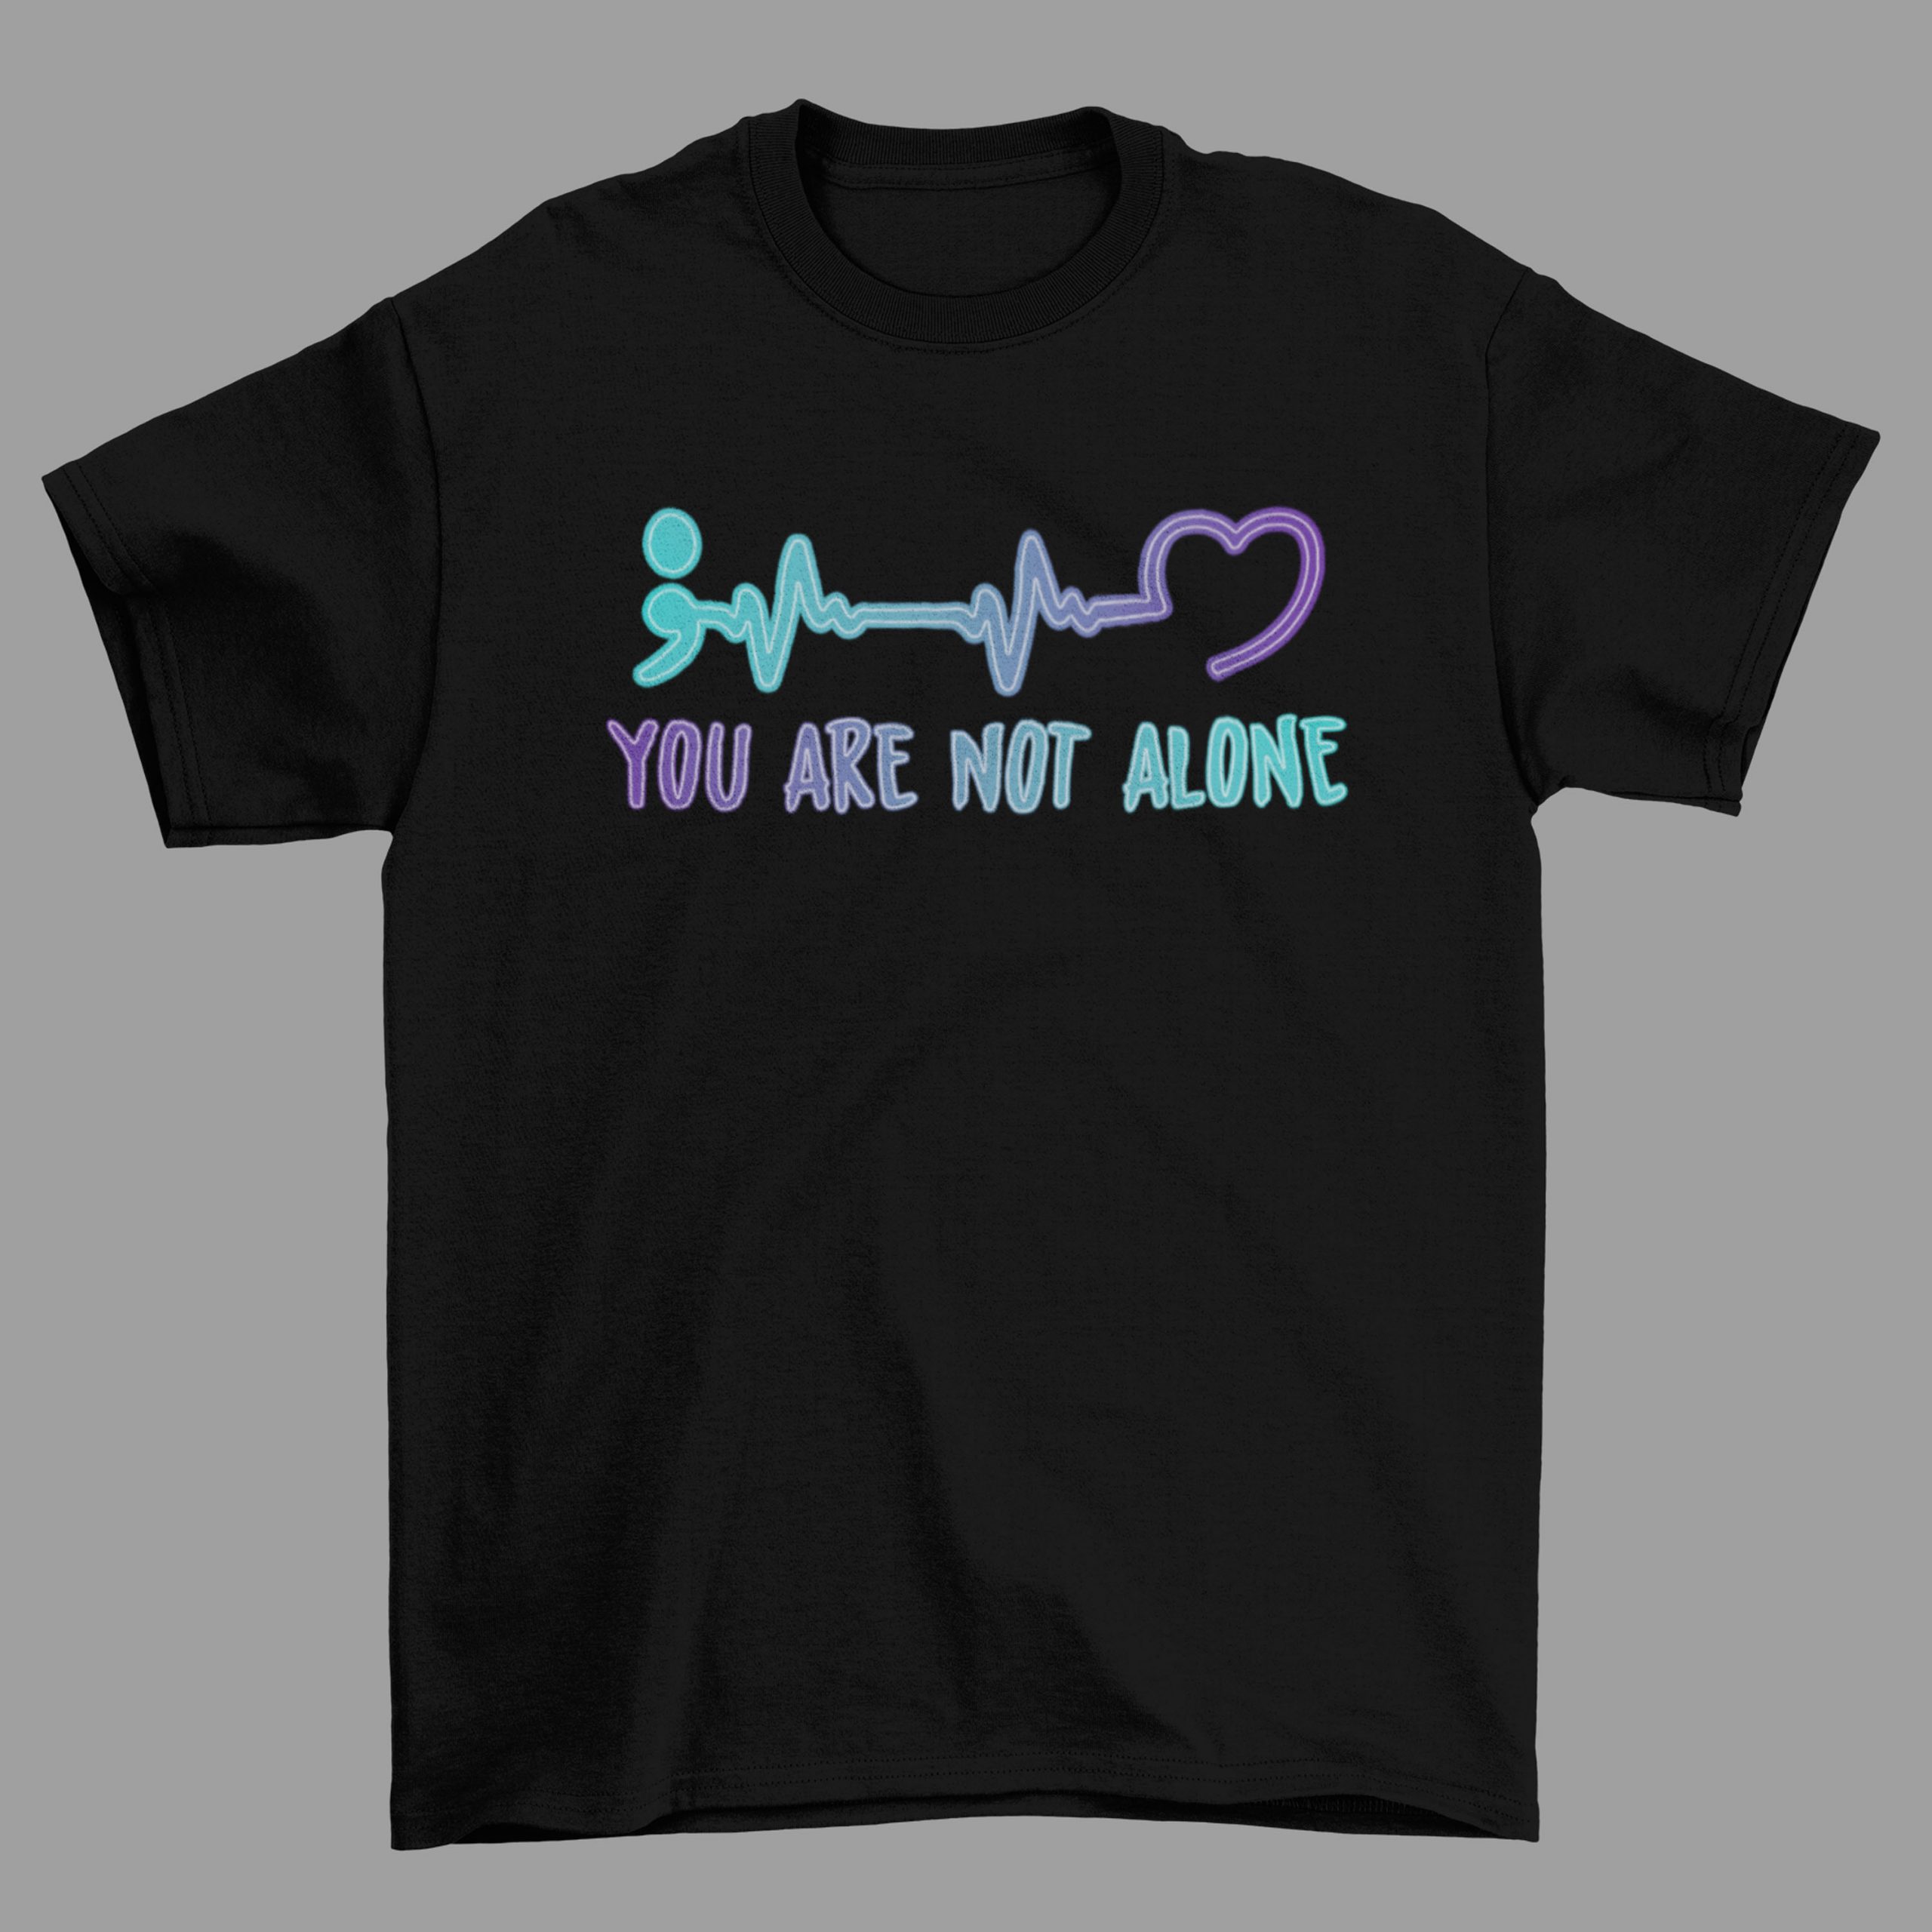 You Are Not Alone, Suicide Prevention Awareness Unisex T-Shirt, Sweatshirt, Hoodie